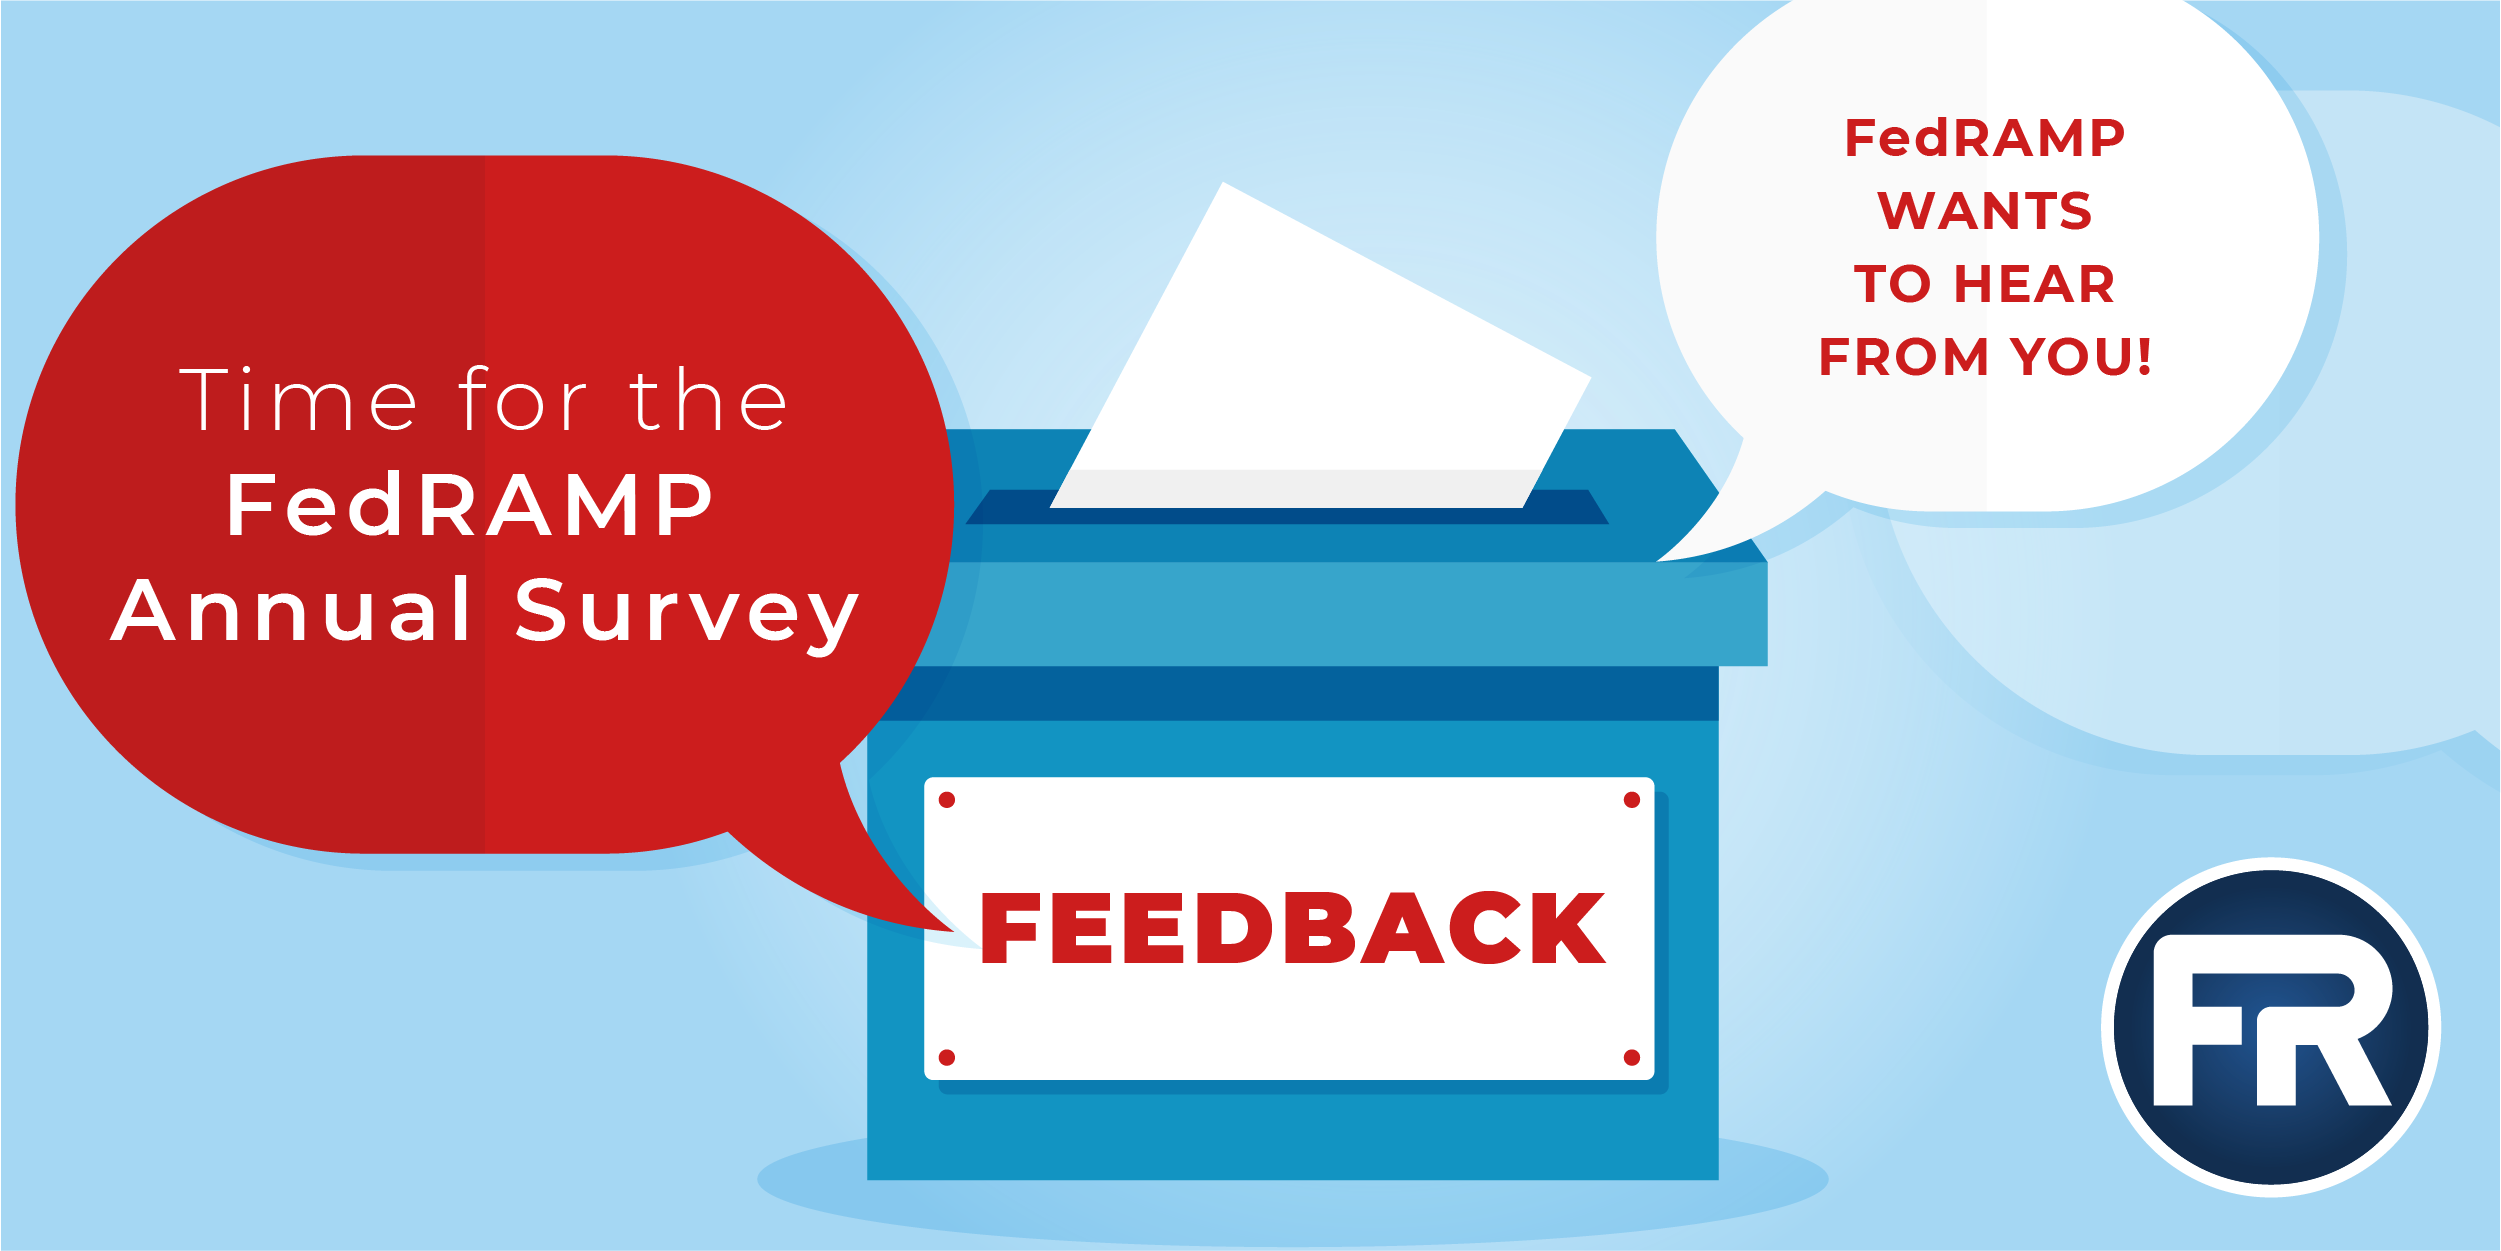 FedRAMP Releases the FY22 Annual Survey